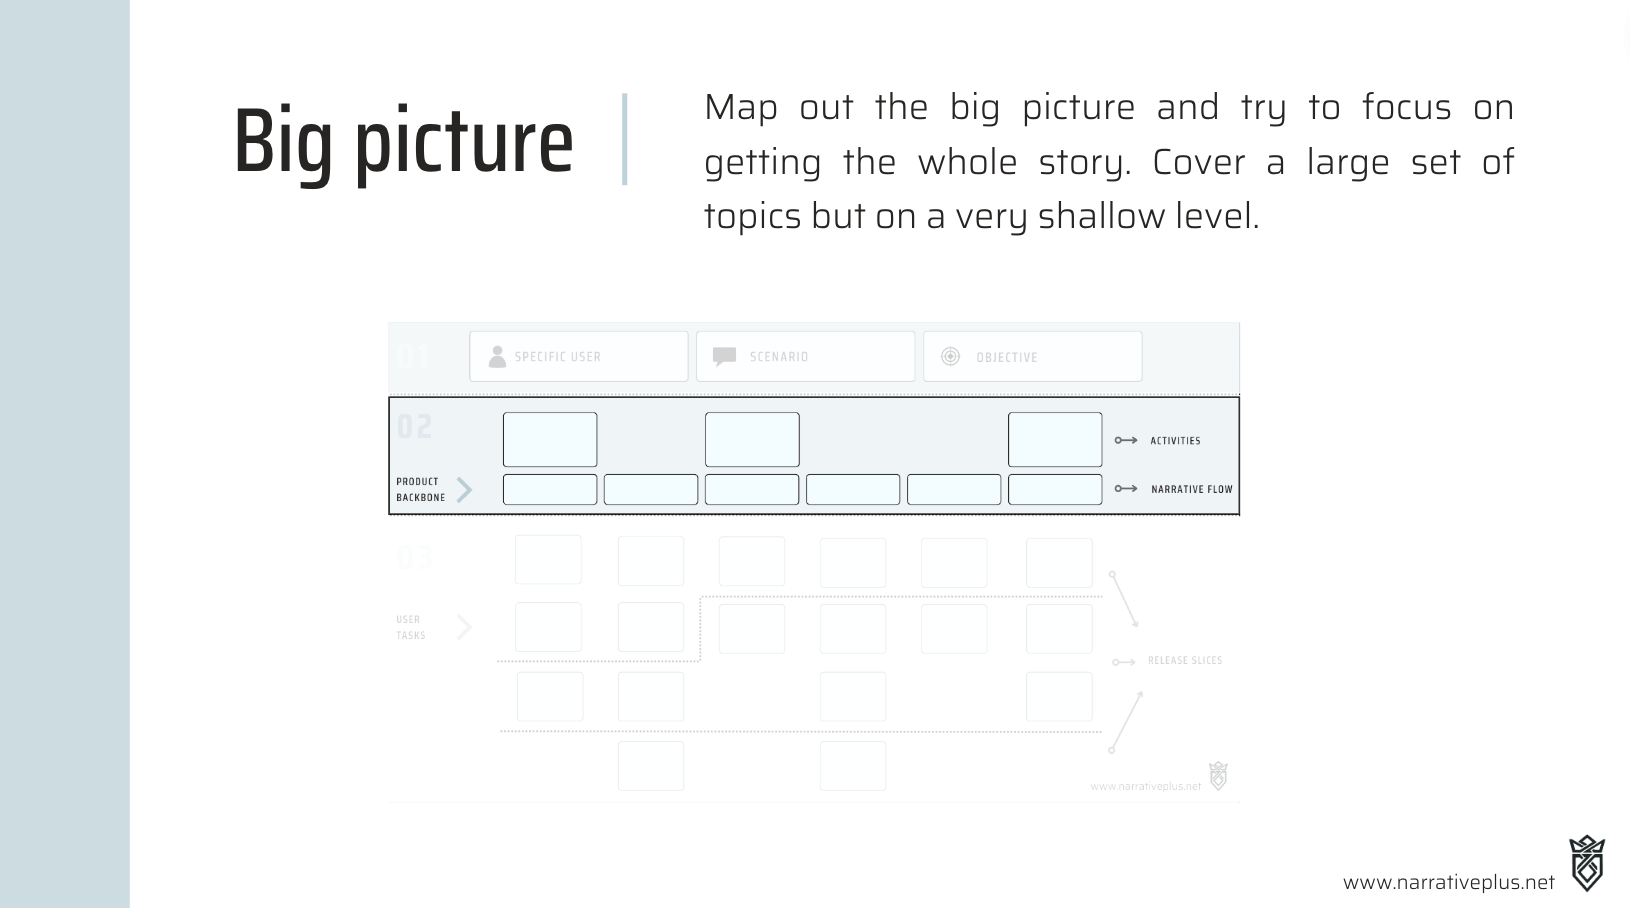 Getting the Big picture with user story mapping workshop